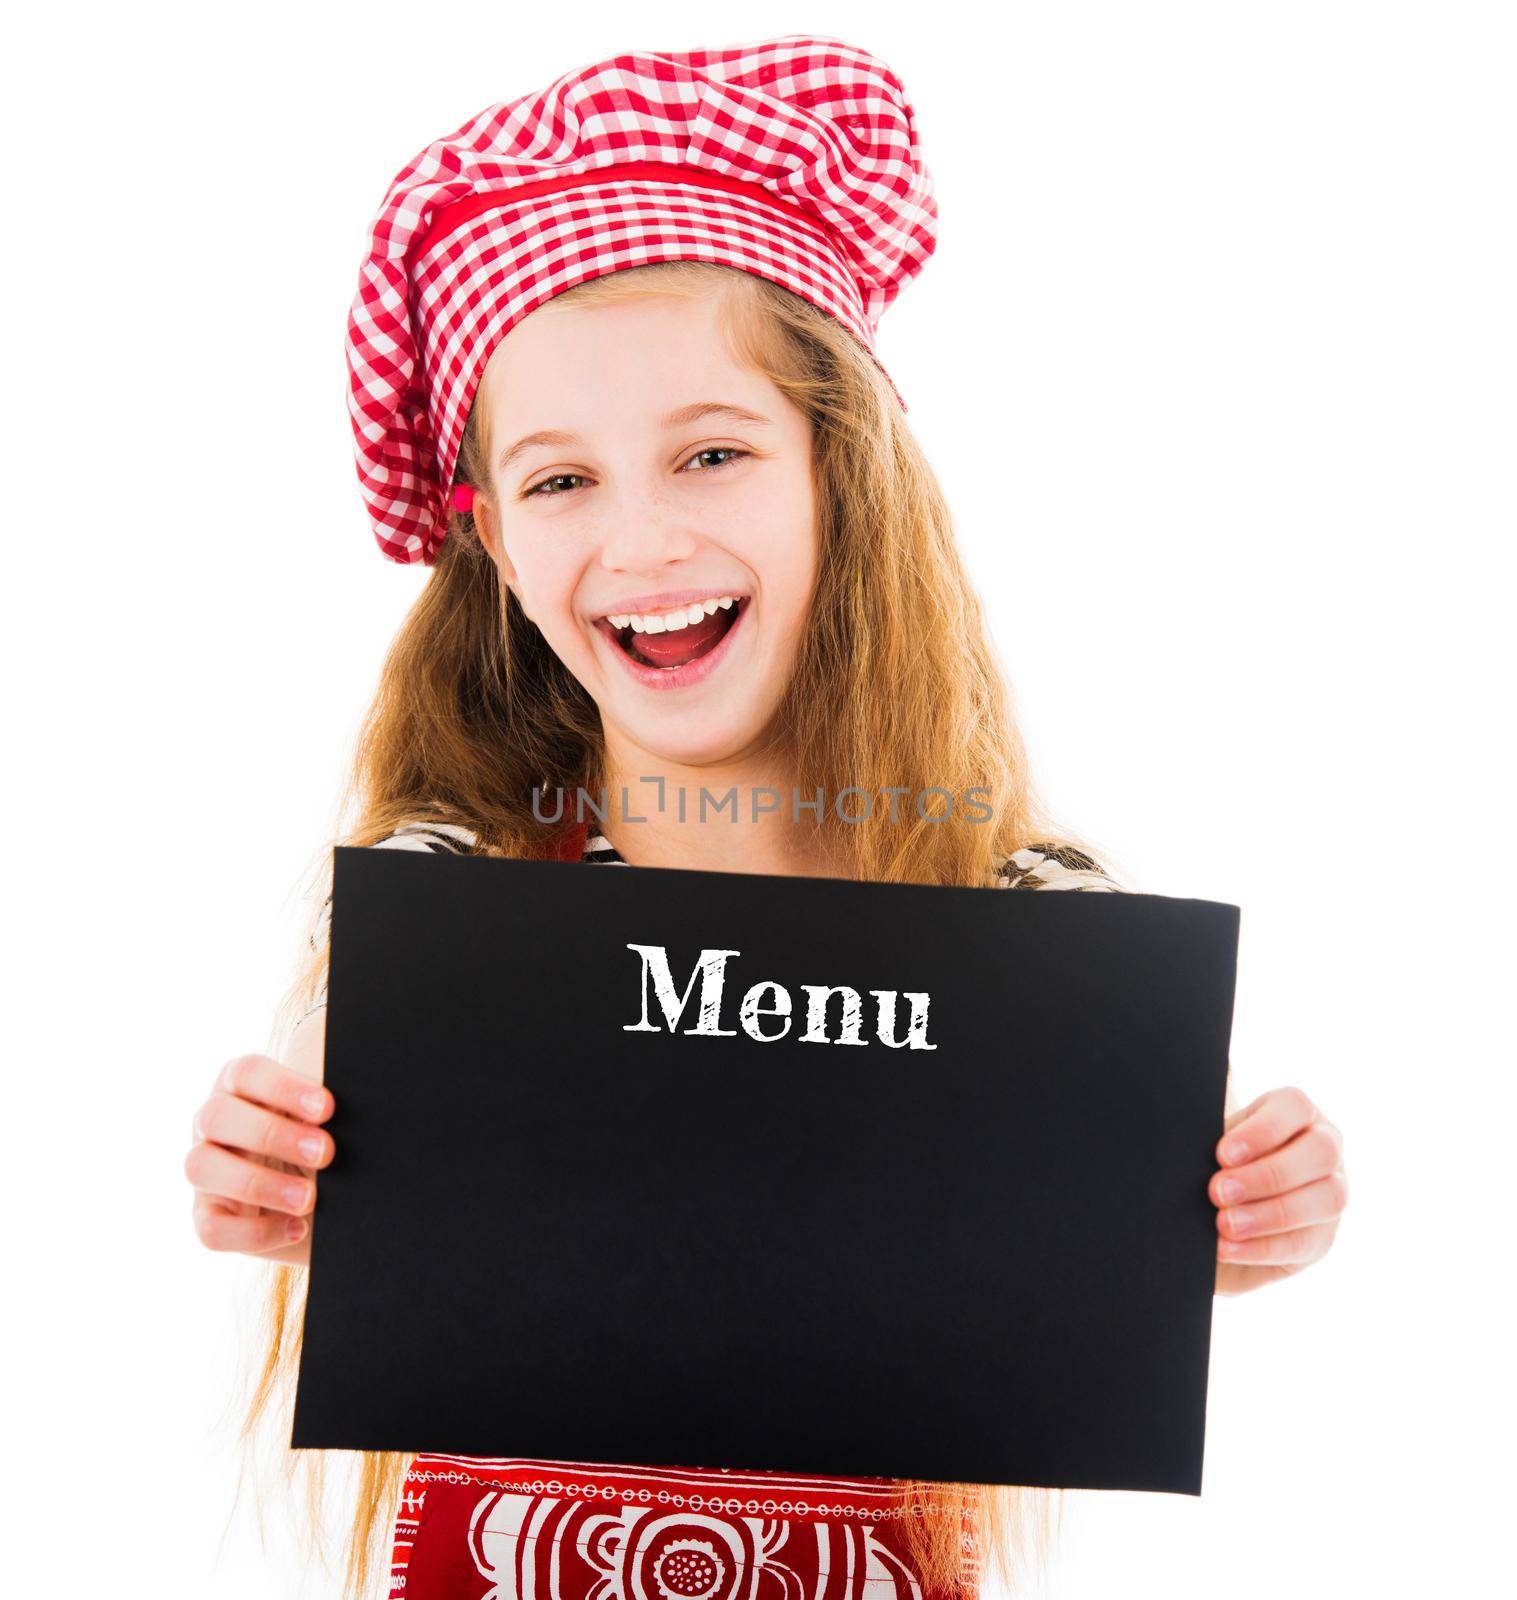 Little girl in kitchen uniform holding menu mockup with copy space in hands and smiling at camera isolated on white background